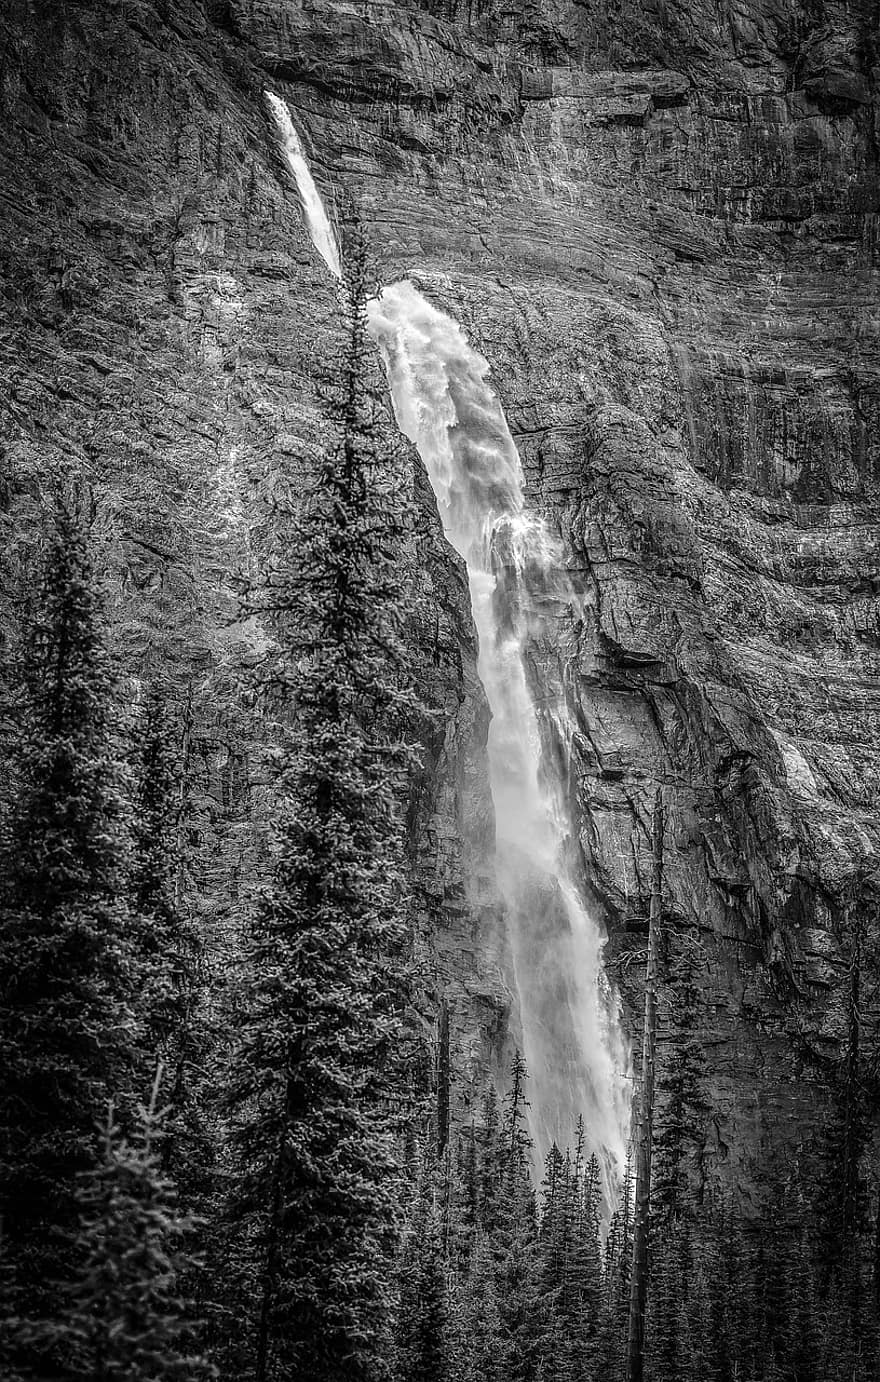 Waterfall, Cliff, Trees, Mountain, Nature, Landscape, Monochrome, rock, black and white, water, travel